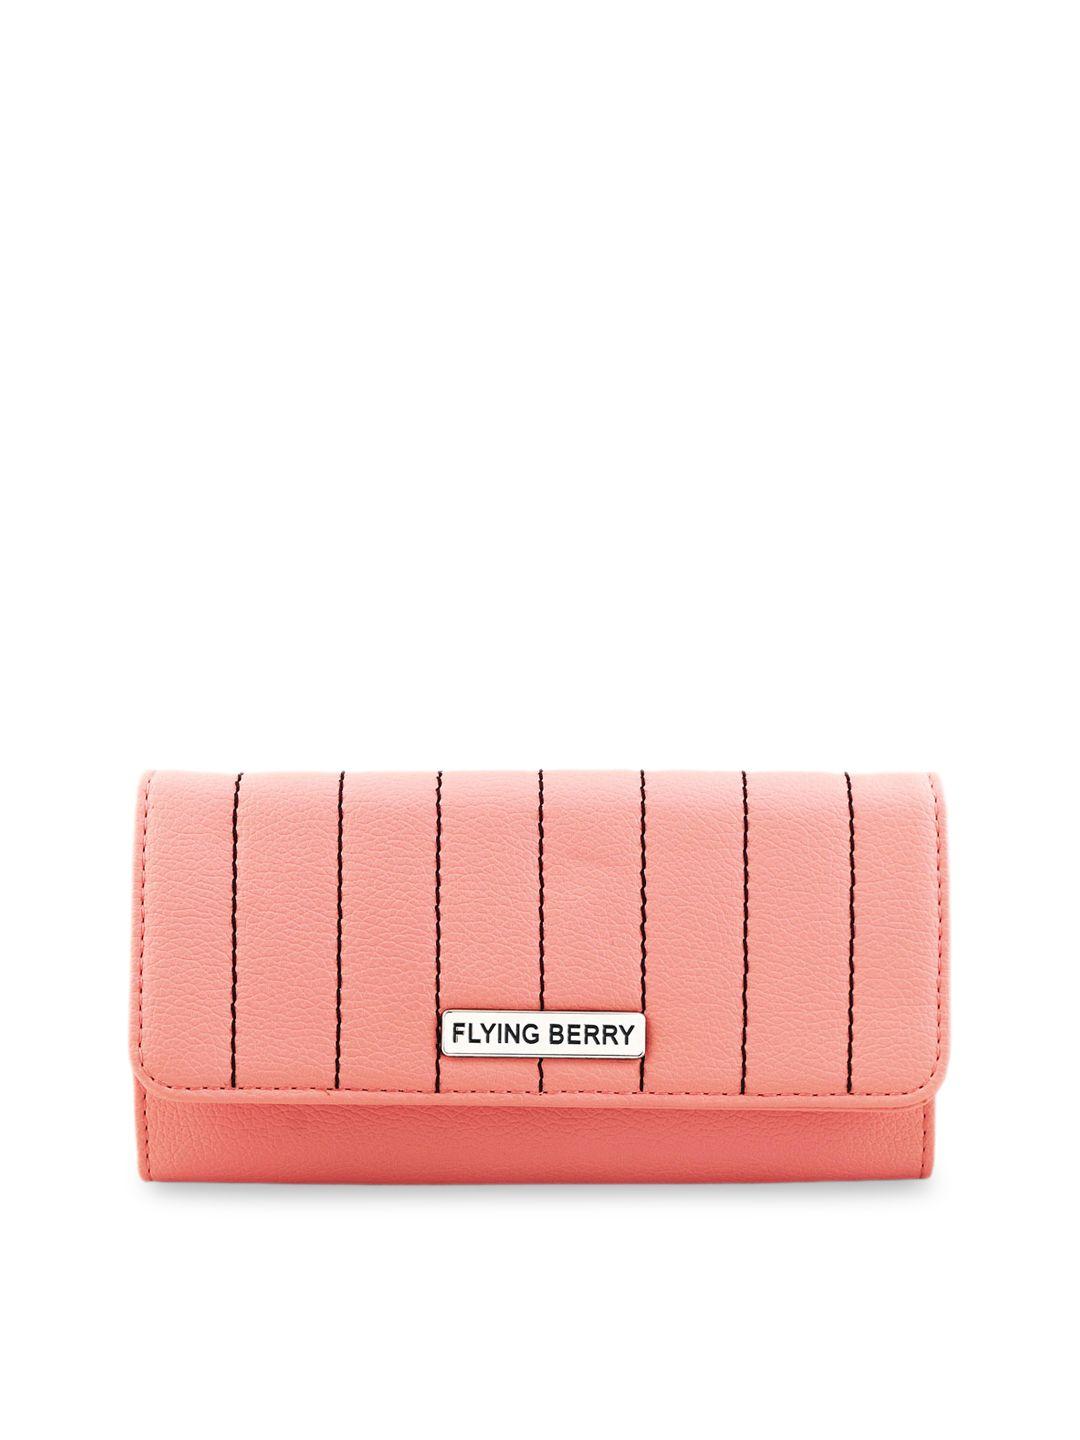 flying berry pink solid clutch